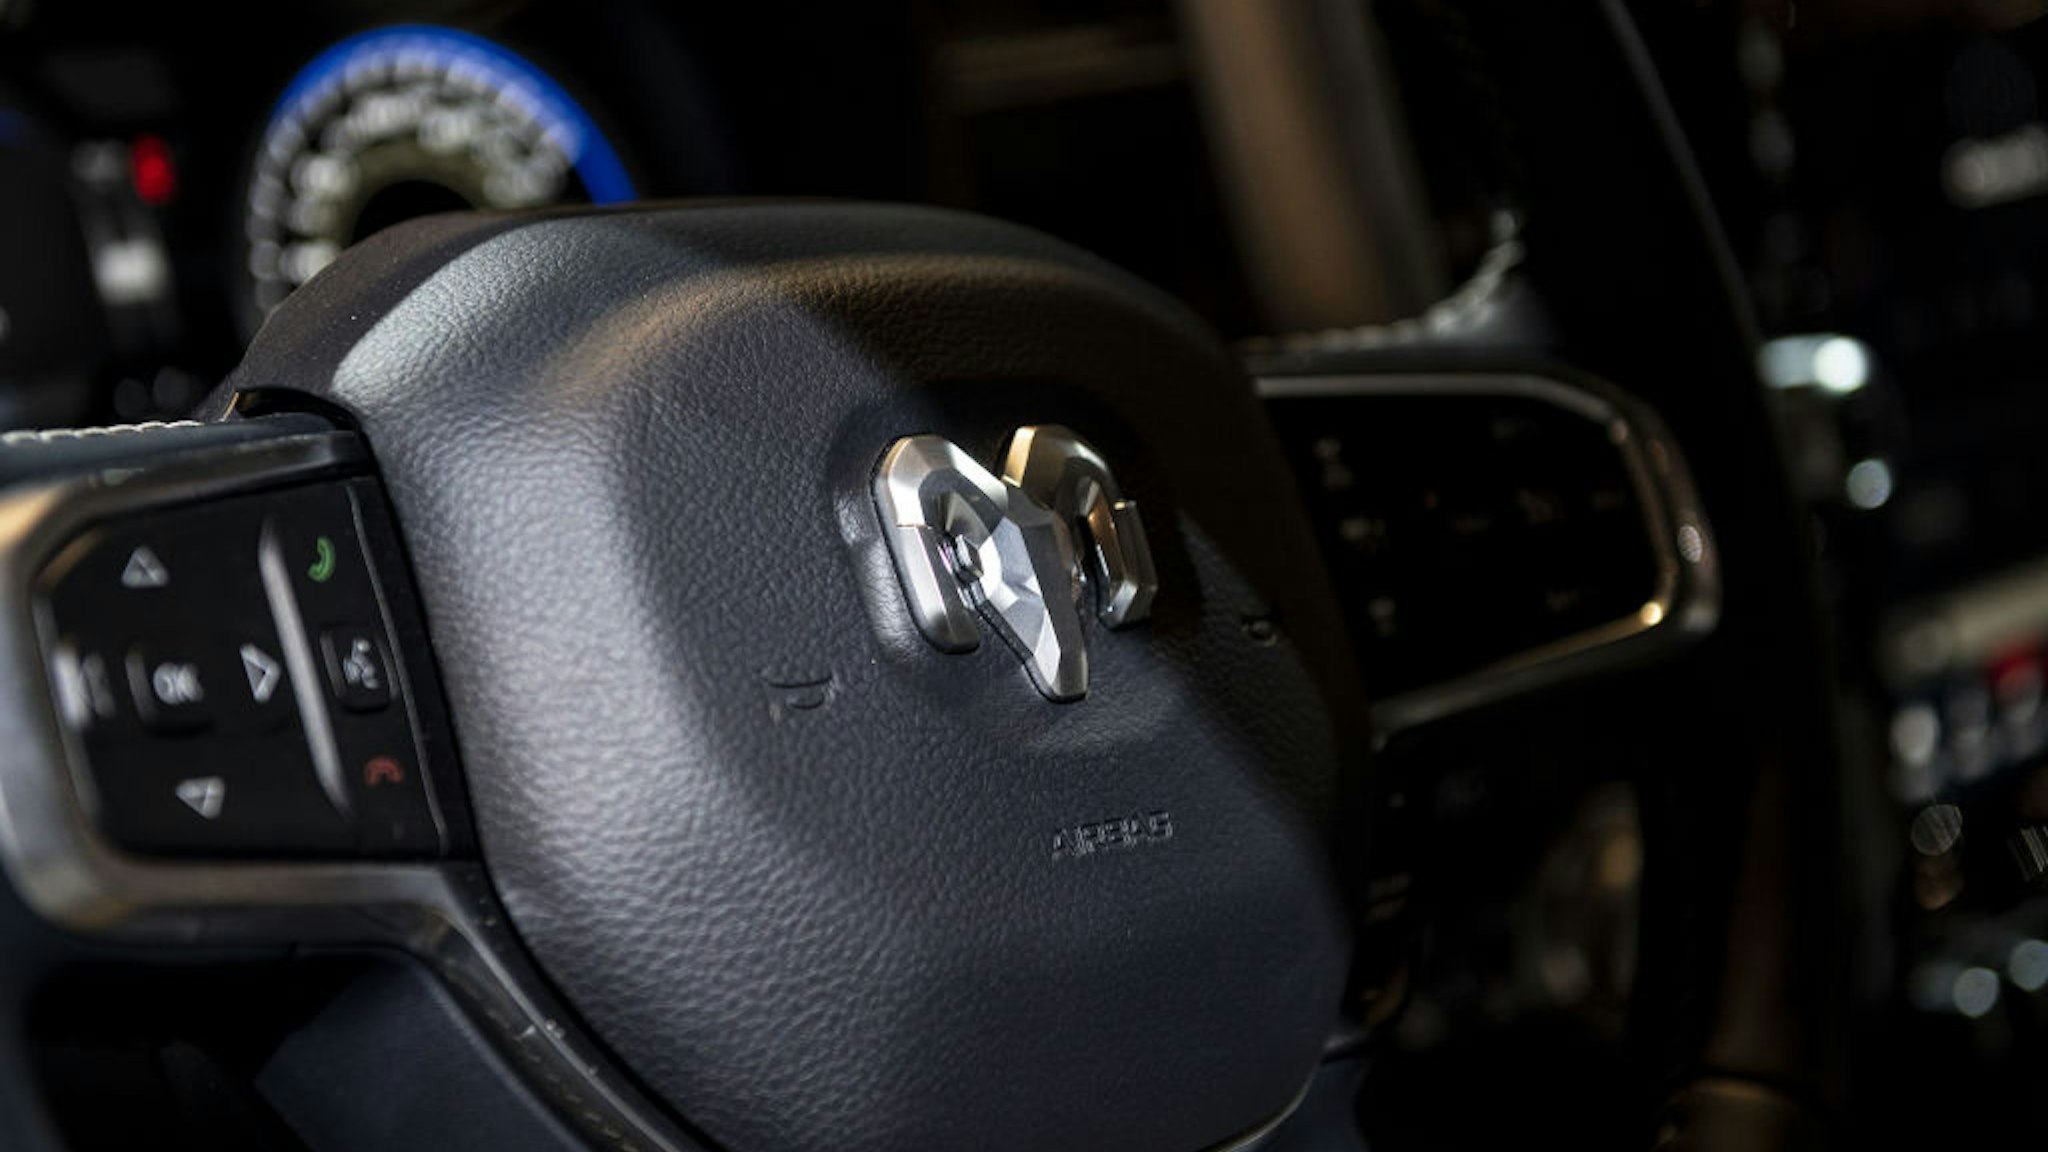 The steering wheel of a Fiat Chrysler Automobiles NV Dodge Ram TRX pickup truck during the media preview for the Chicago Auto Show in Chicago, Illinois, U.S., on Wednesday, July 14, 2021. The Chicago Auto Show marks not only the resumption of the largest U.S. auto show, but also heralds the return of those crowded industry conventions, and the tourist and tax dollars they bring. Photographer: Christopher Dilts/Bloomberg via Getty Images